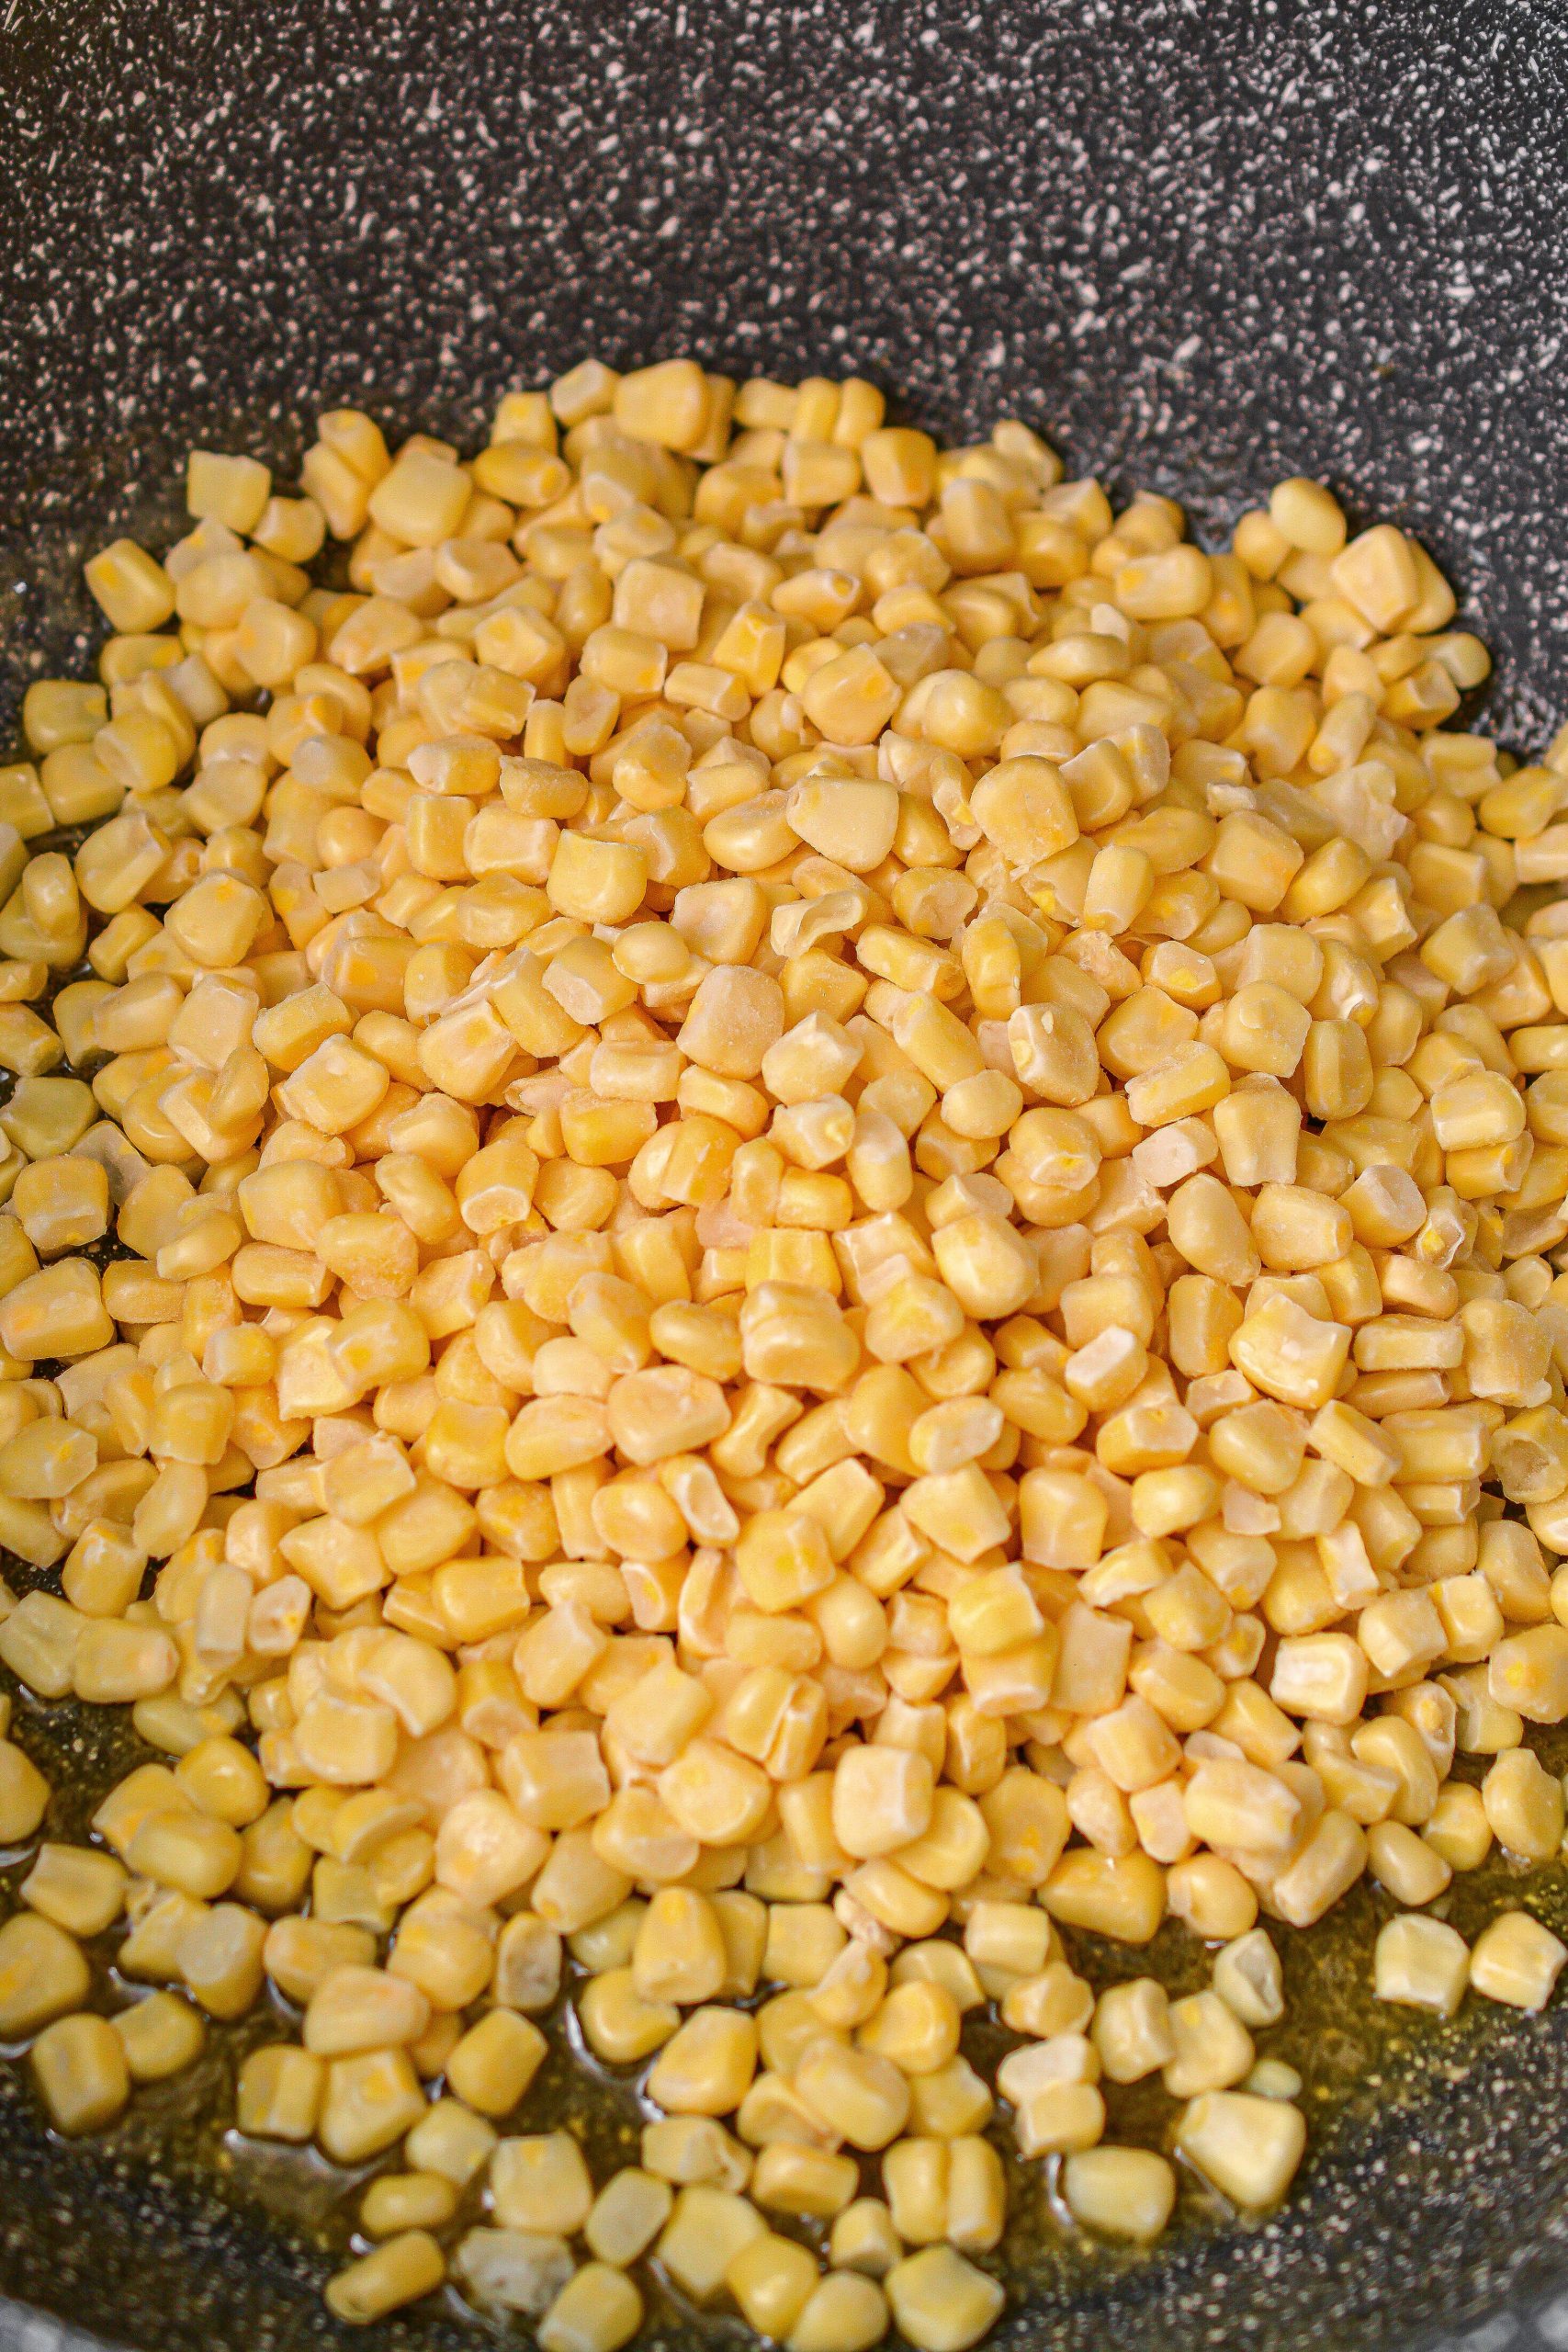 Add in the frozen corn and saute for 5-8 minutes